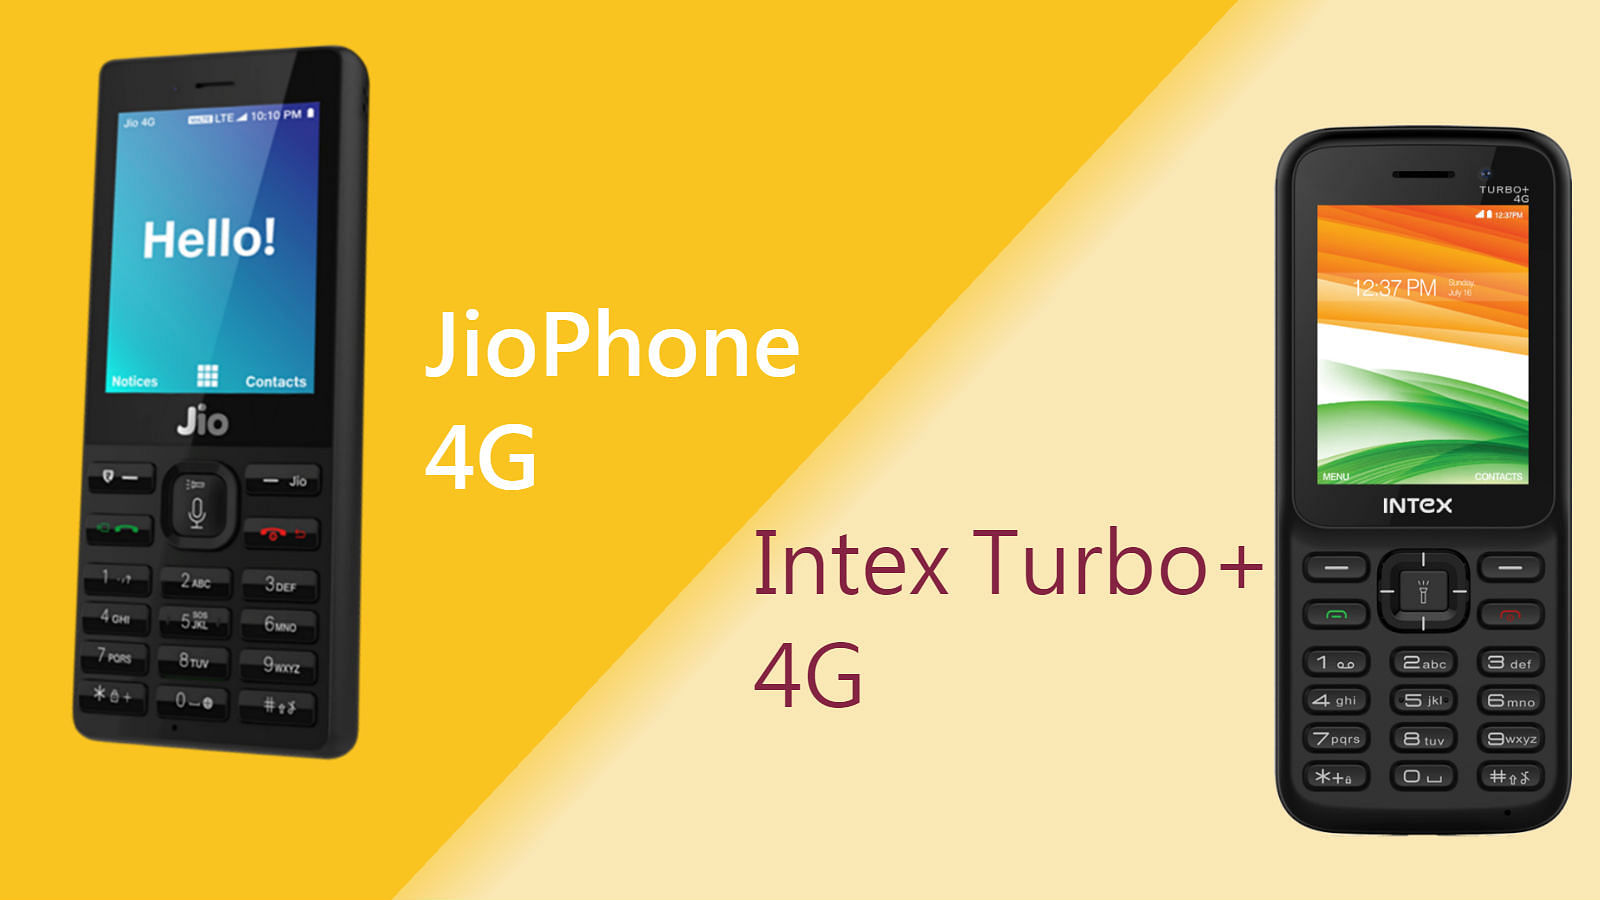 The JioPhone and the newly launched Intex Turbo+ 4G